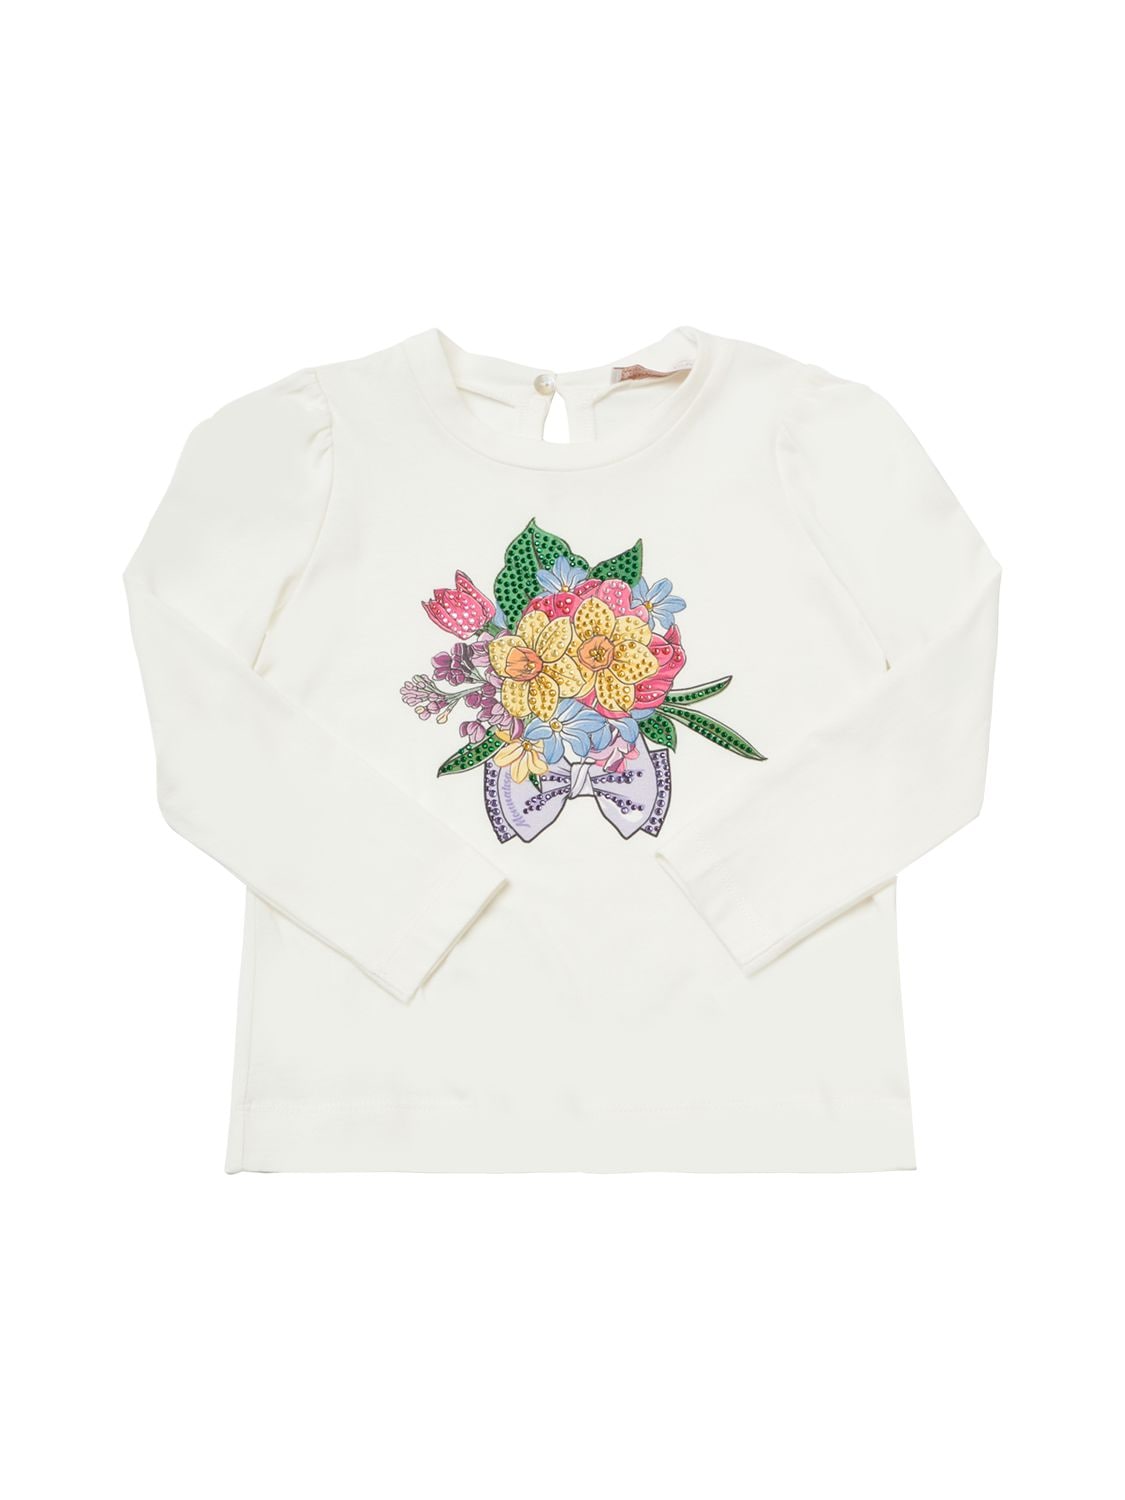 Image of Flower Printed Cotton Jersey T-shirt